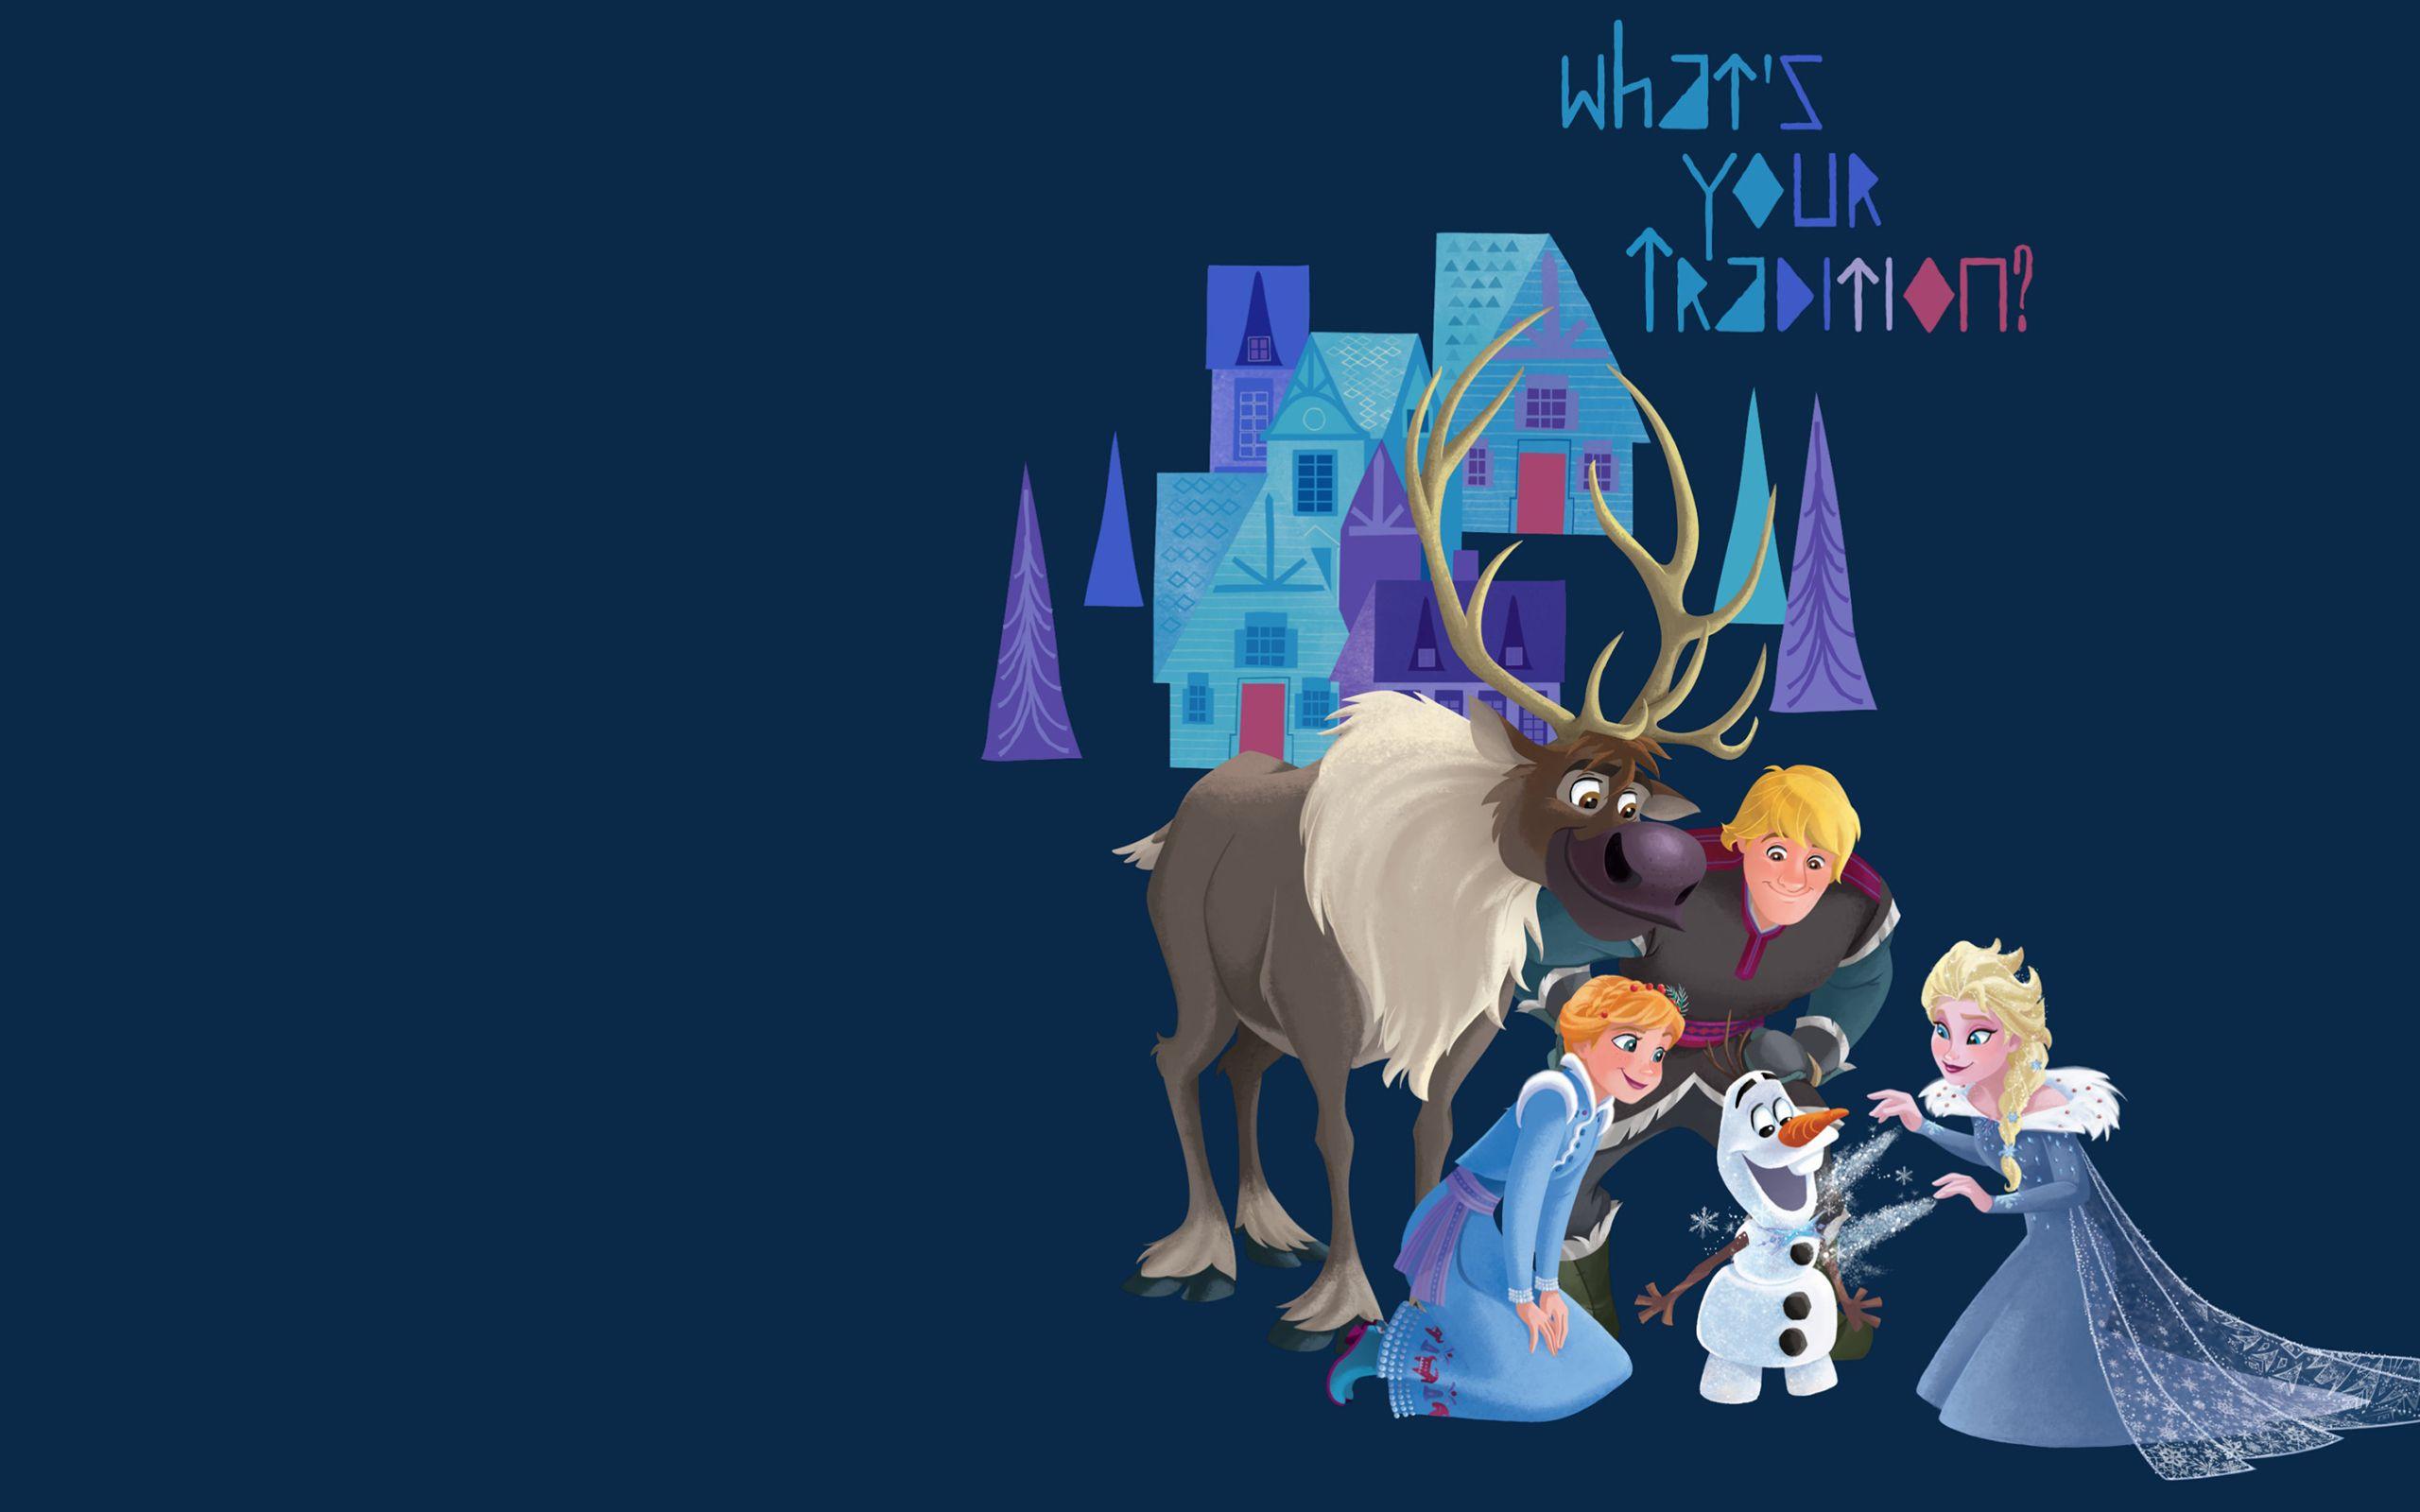 Olaf's Frozen Adventure new wallpaper for winter Holidays